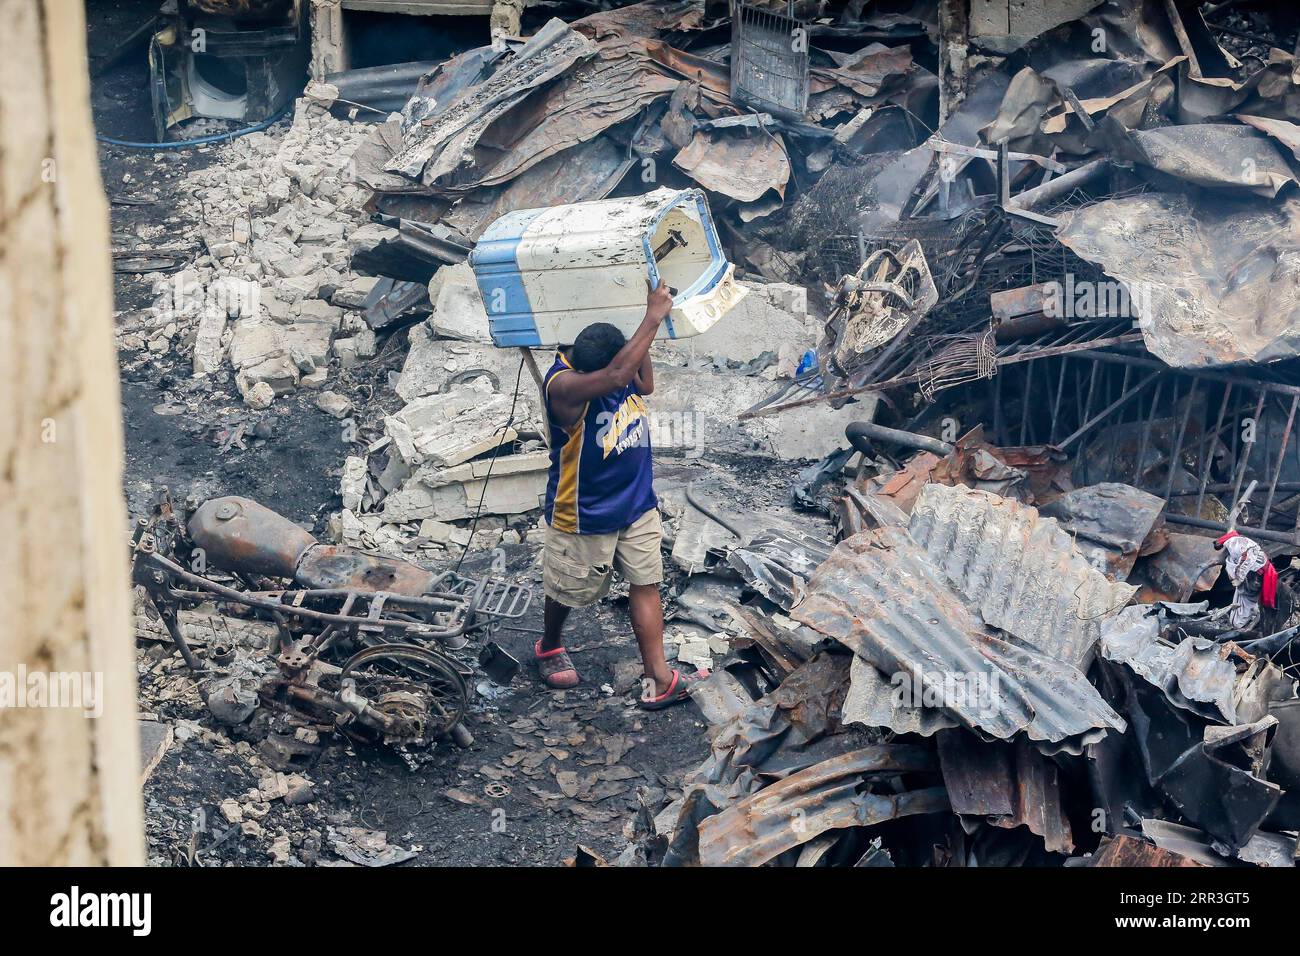 201103 -- MANILA, Nov. 3, 2020 -- A resident carries his belongings after a fire at a residential area in Manila, the Philippines, on Nov. 3, 2020.  PHILIPPINES-MANILA-FIRE-AFTERMATH RouellexUmali PUBLICATIONxNOTxINxCHN Stock Photo